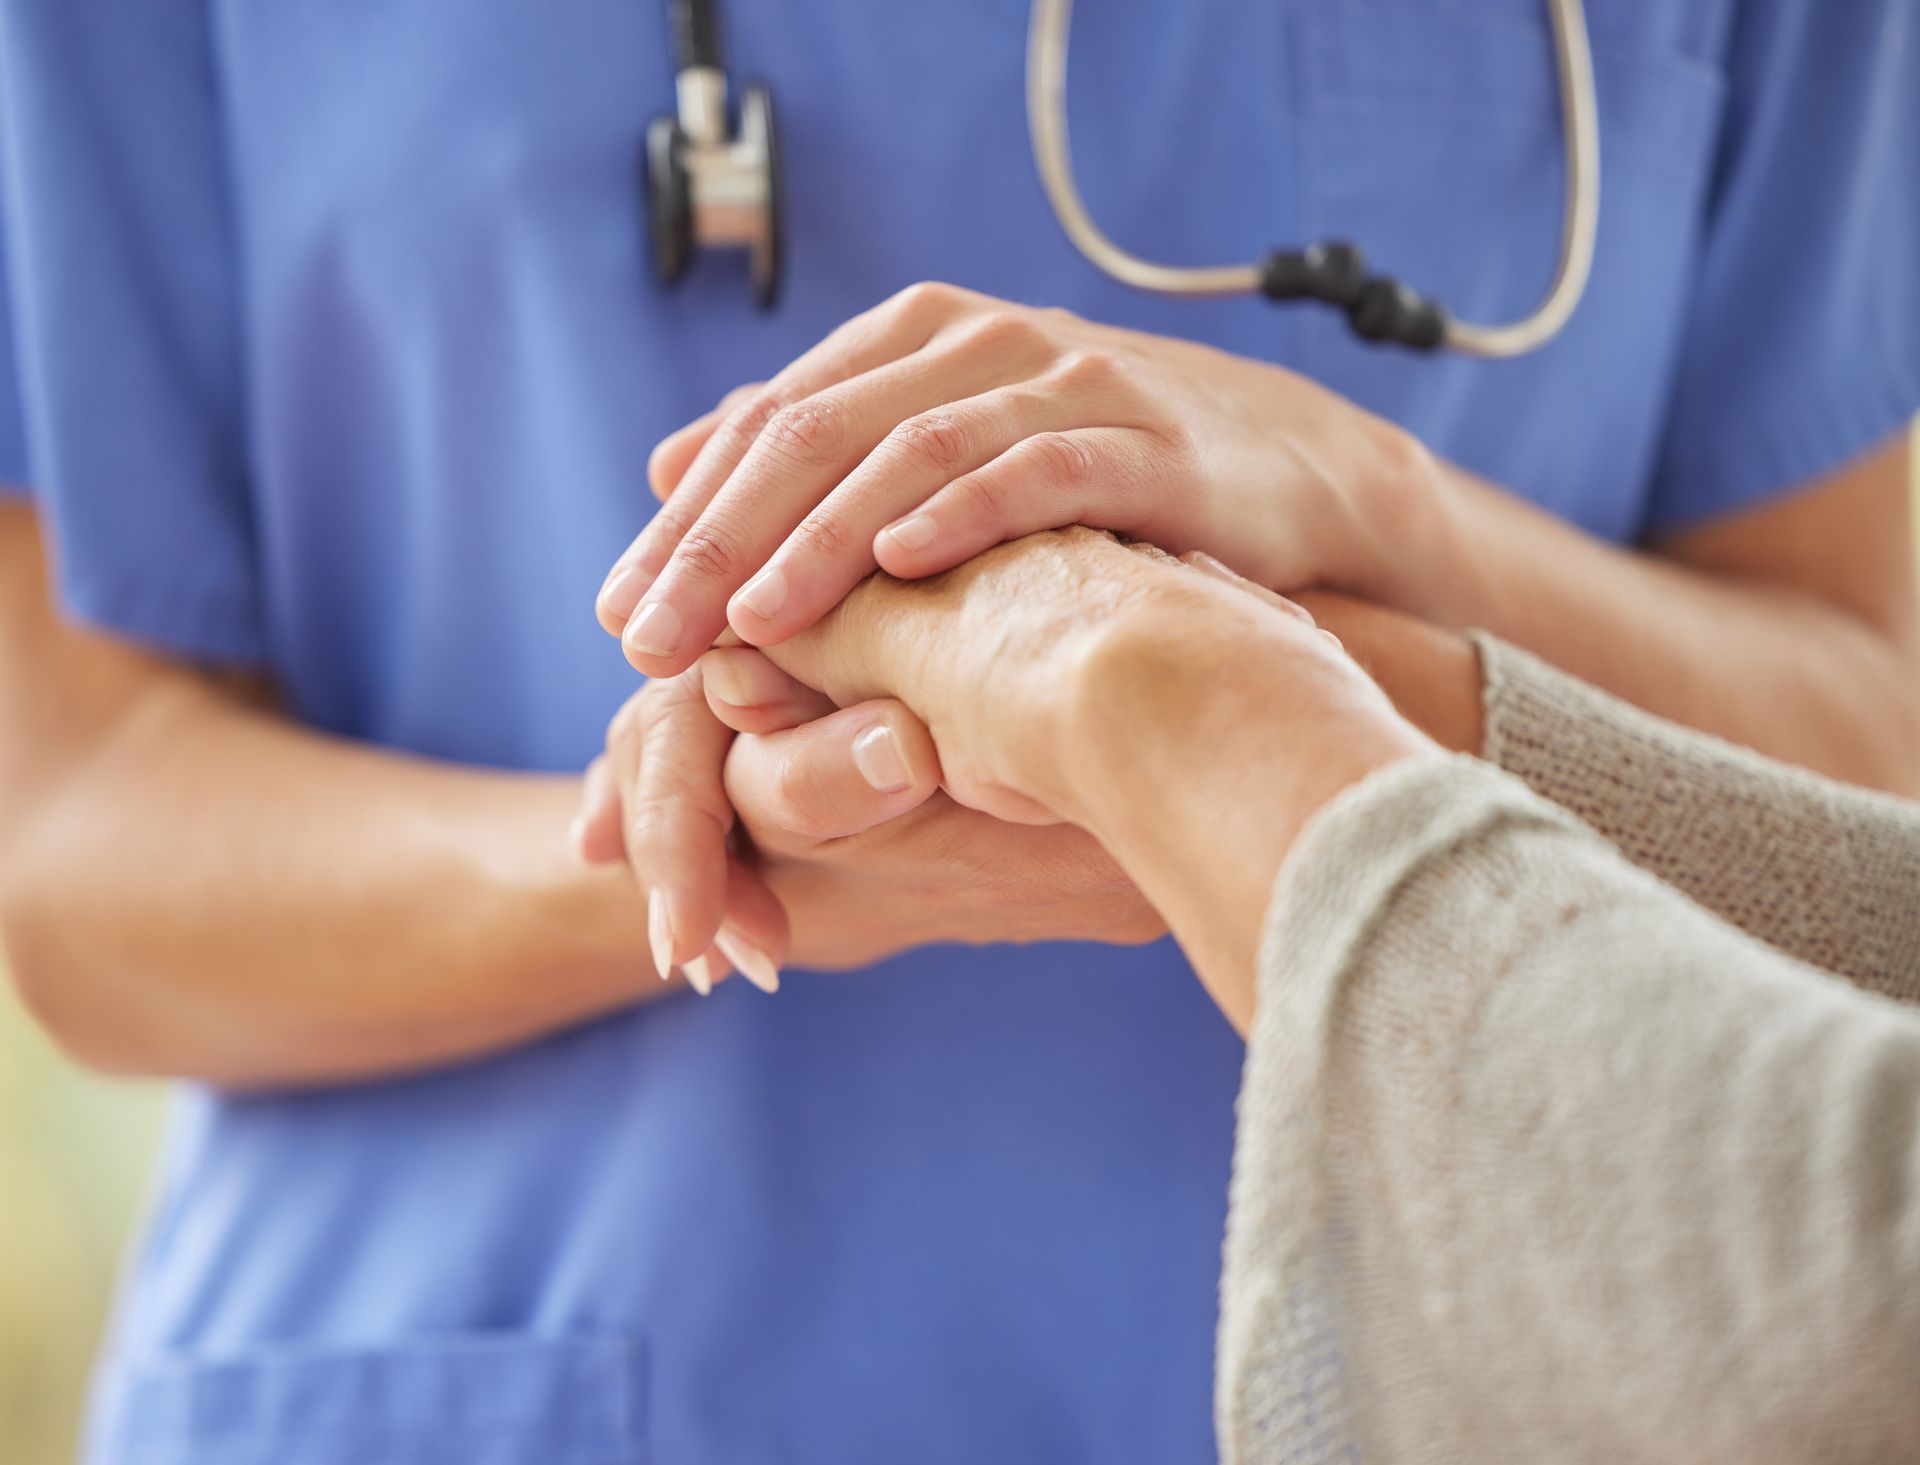 Nurse Holding the Hands of Patient